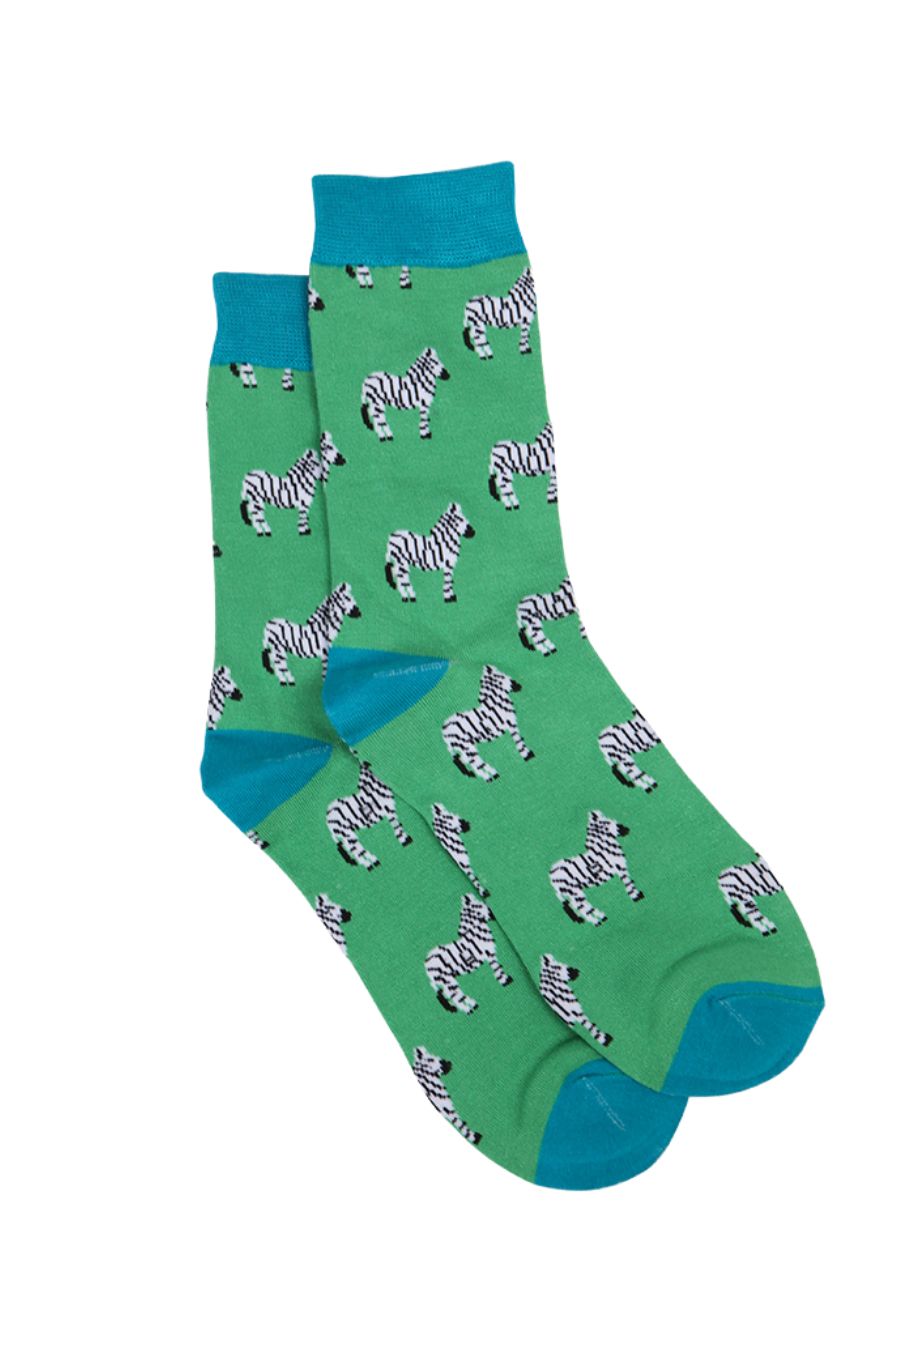 green socks with a pattern of zebras all over, the socks have a blue heel, toe and cuff